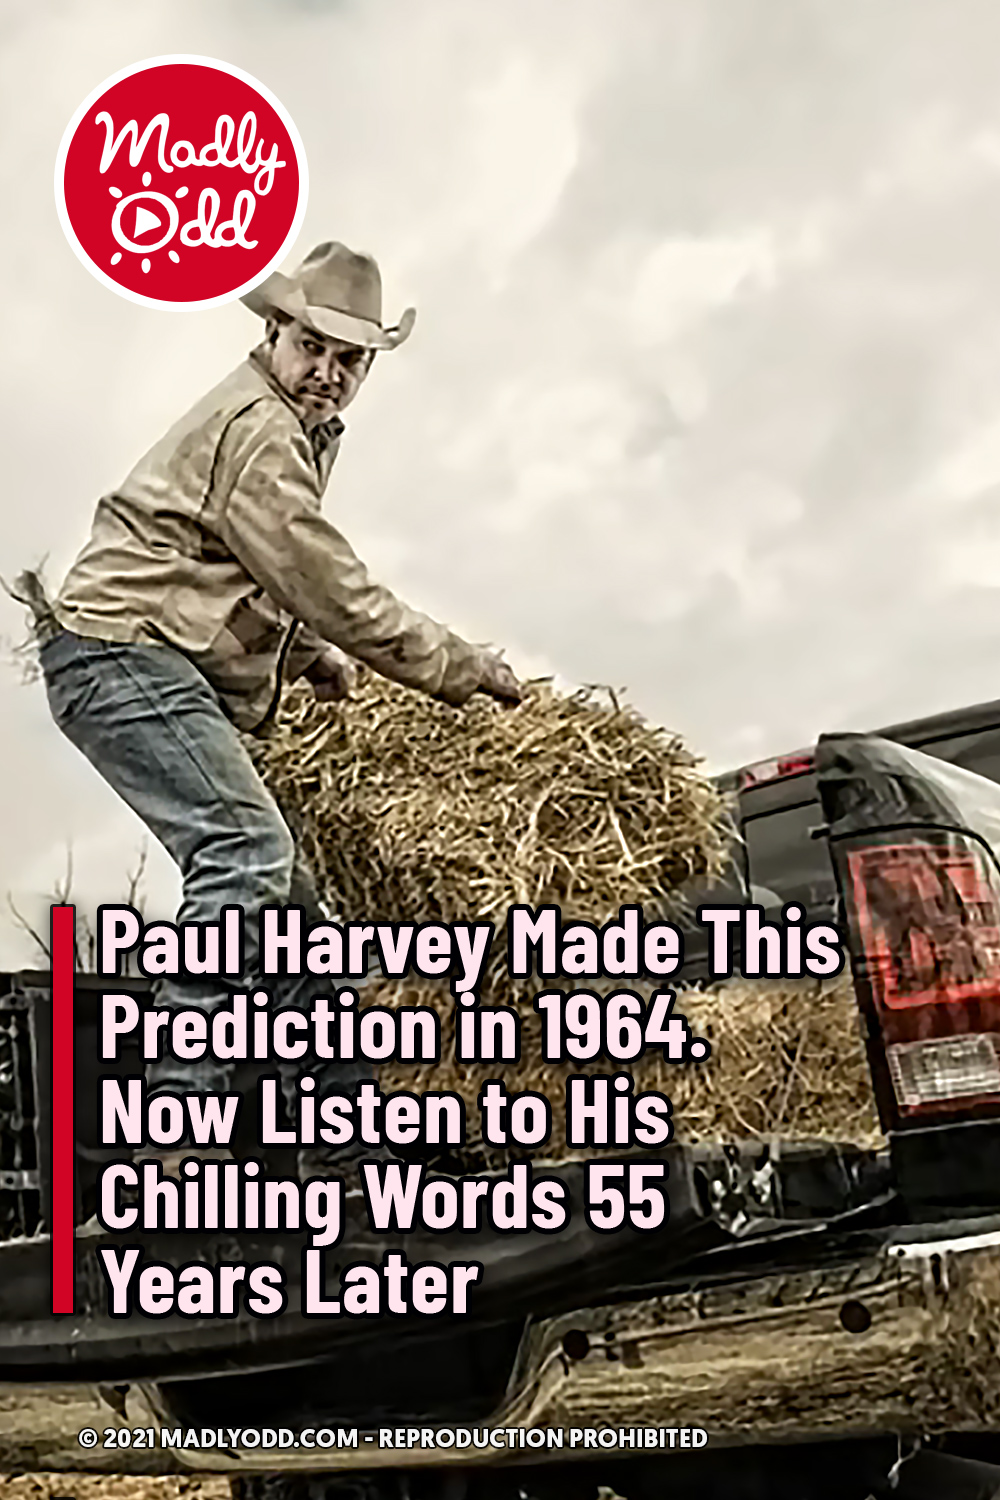 Paul Harvey Made This Prediction in 1965. Now Listen to His Chilling Words...